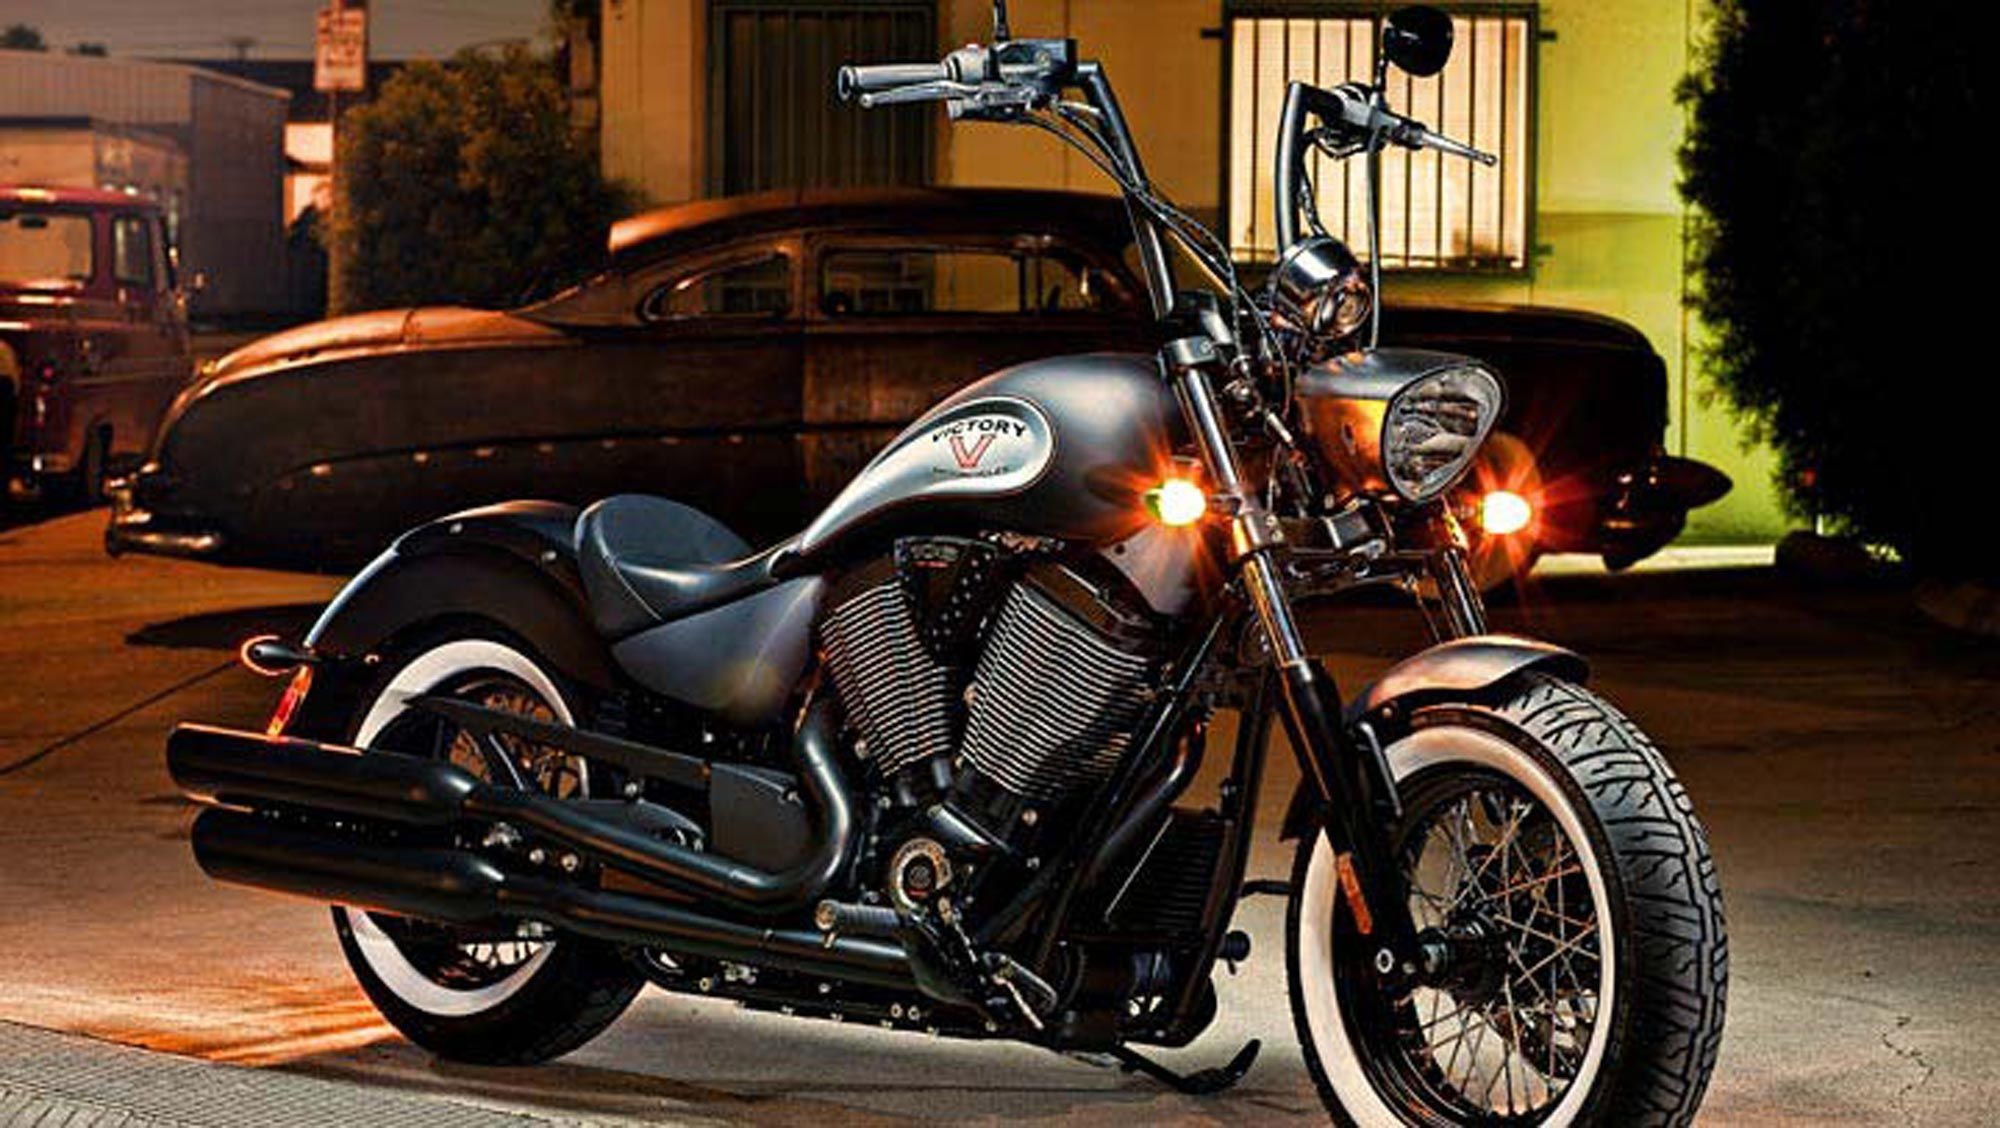 2000x1128 Images For > 2013 Victory Motorcycles Wallpaper